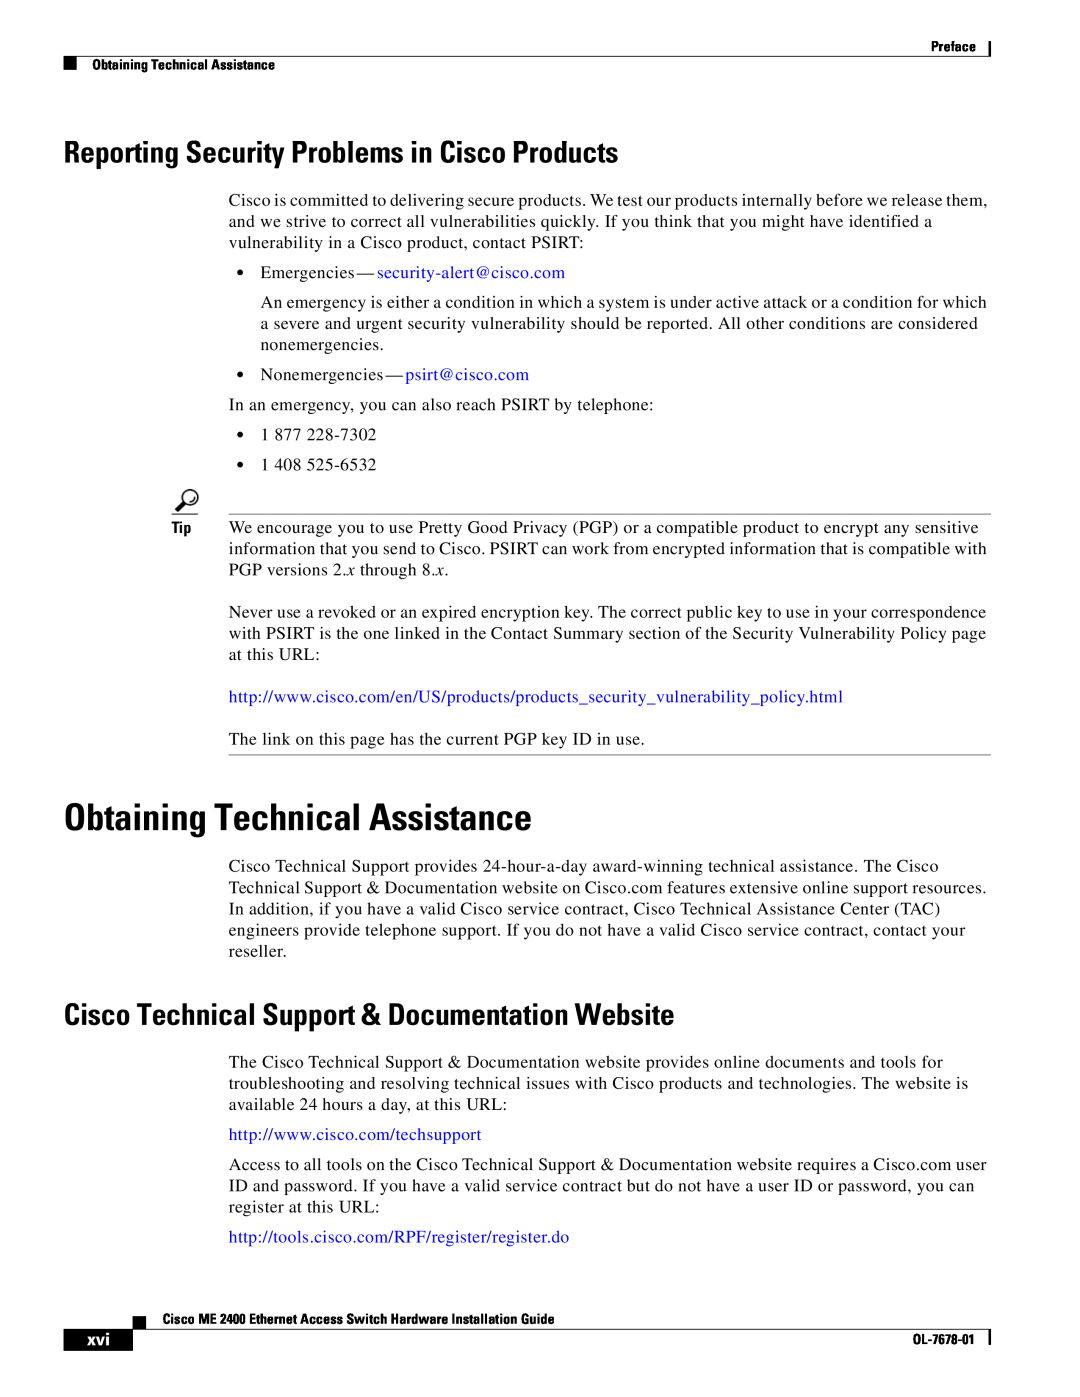 Cisco Systems ME 2400 manual Obtaining Technical Assistance, Reporting Security Problems in Cisco Products 